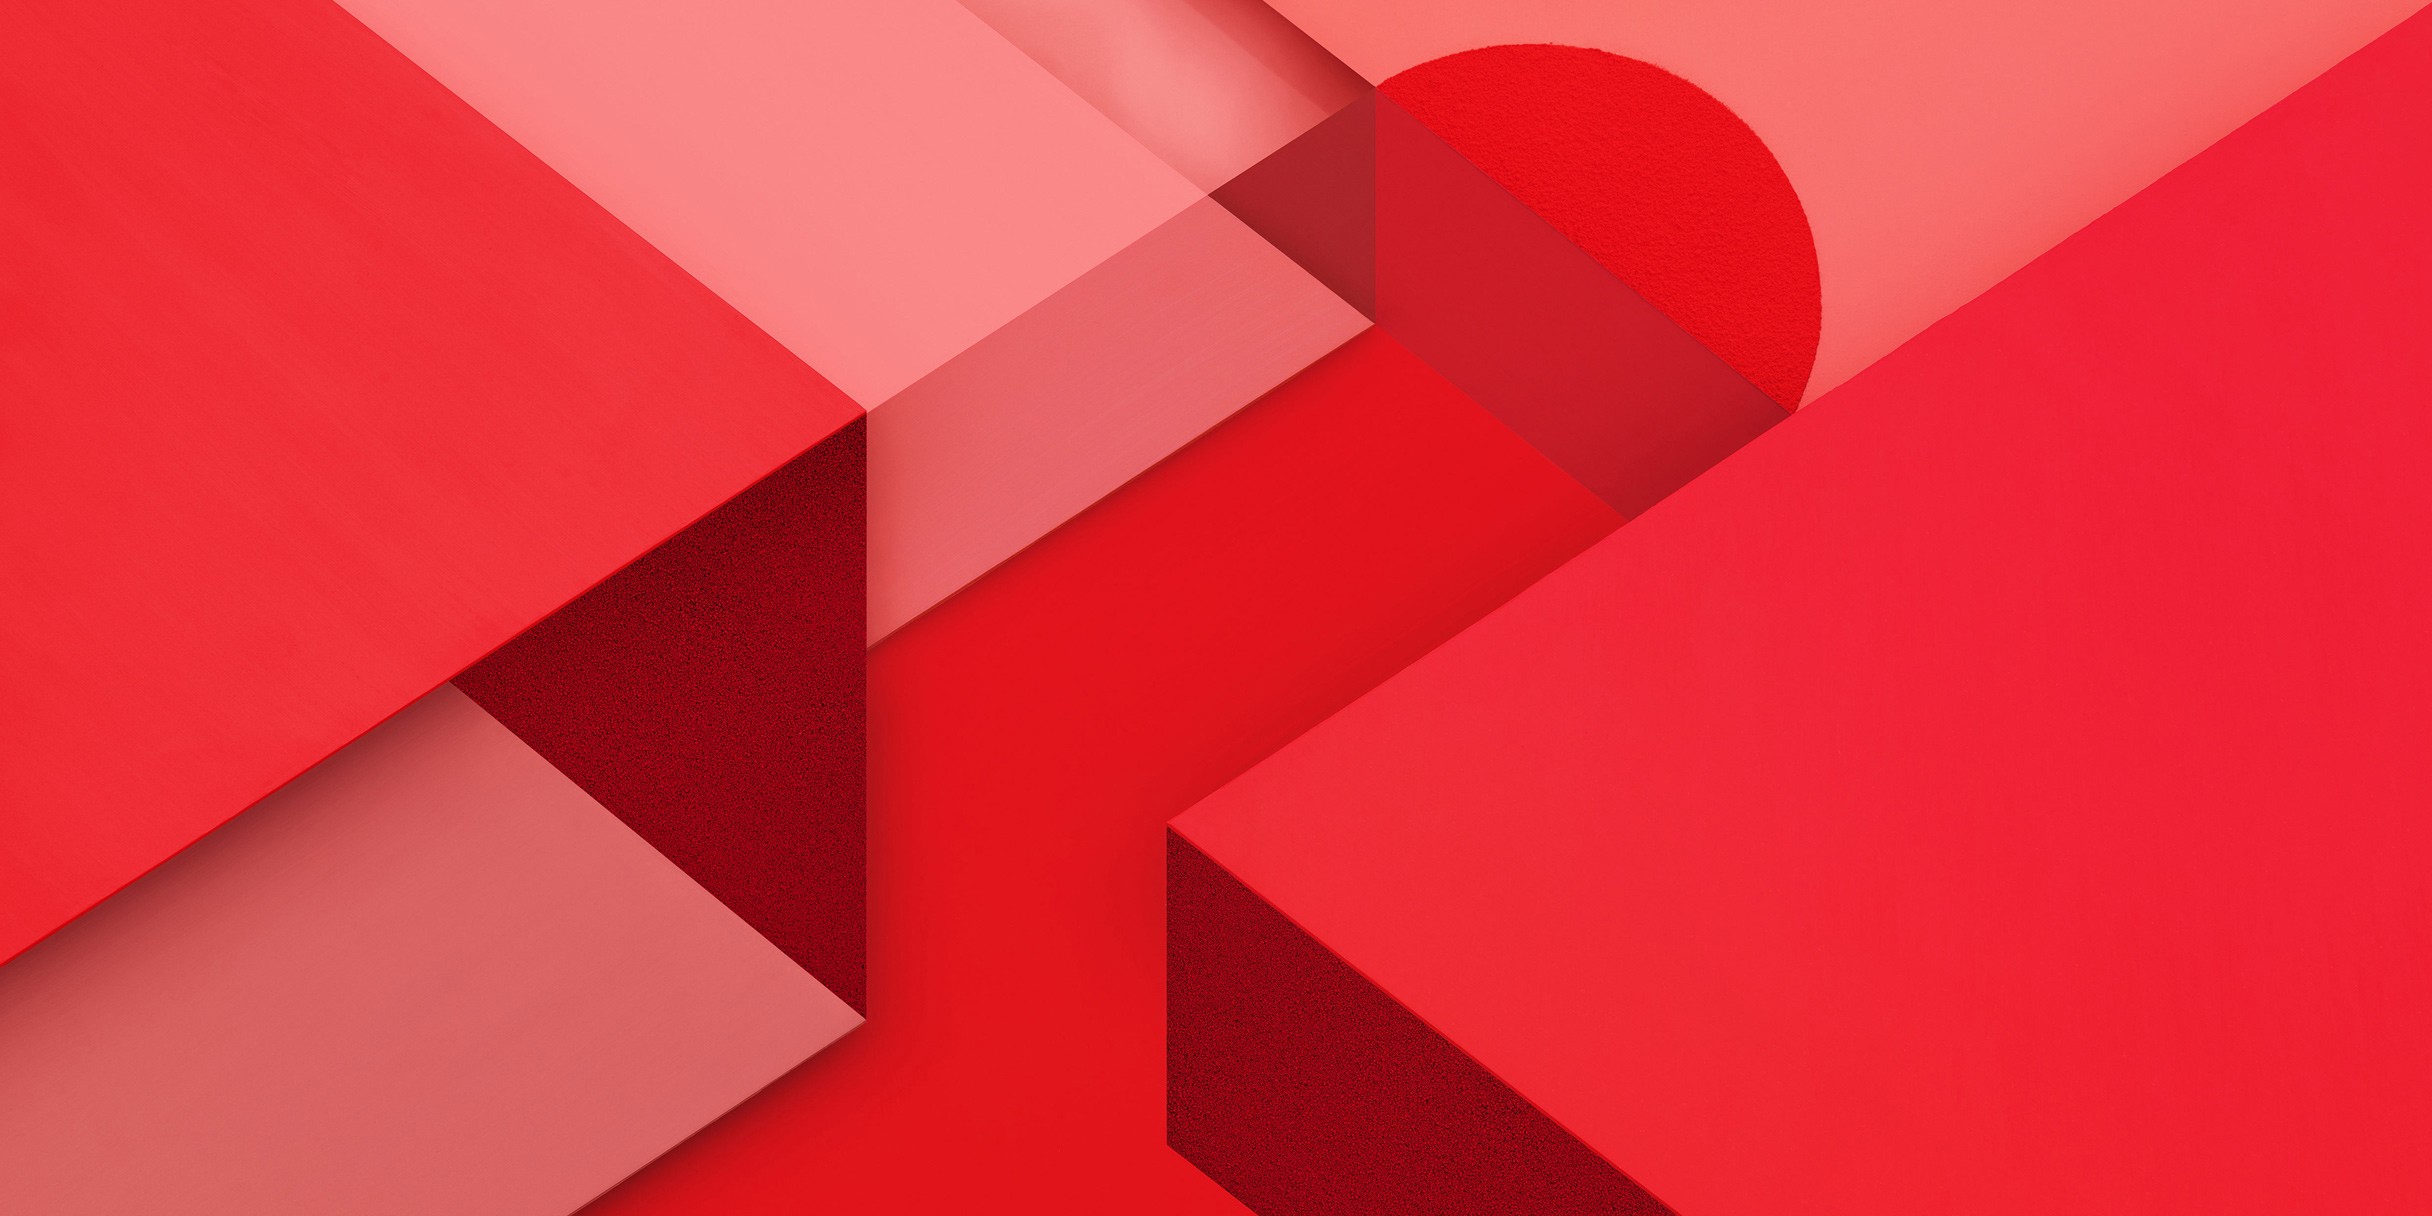 Red geometric imagery based on material design.